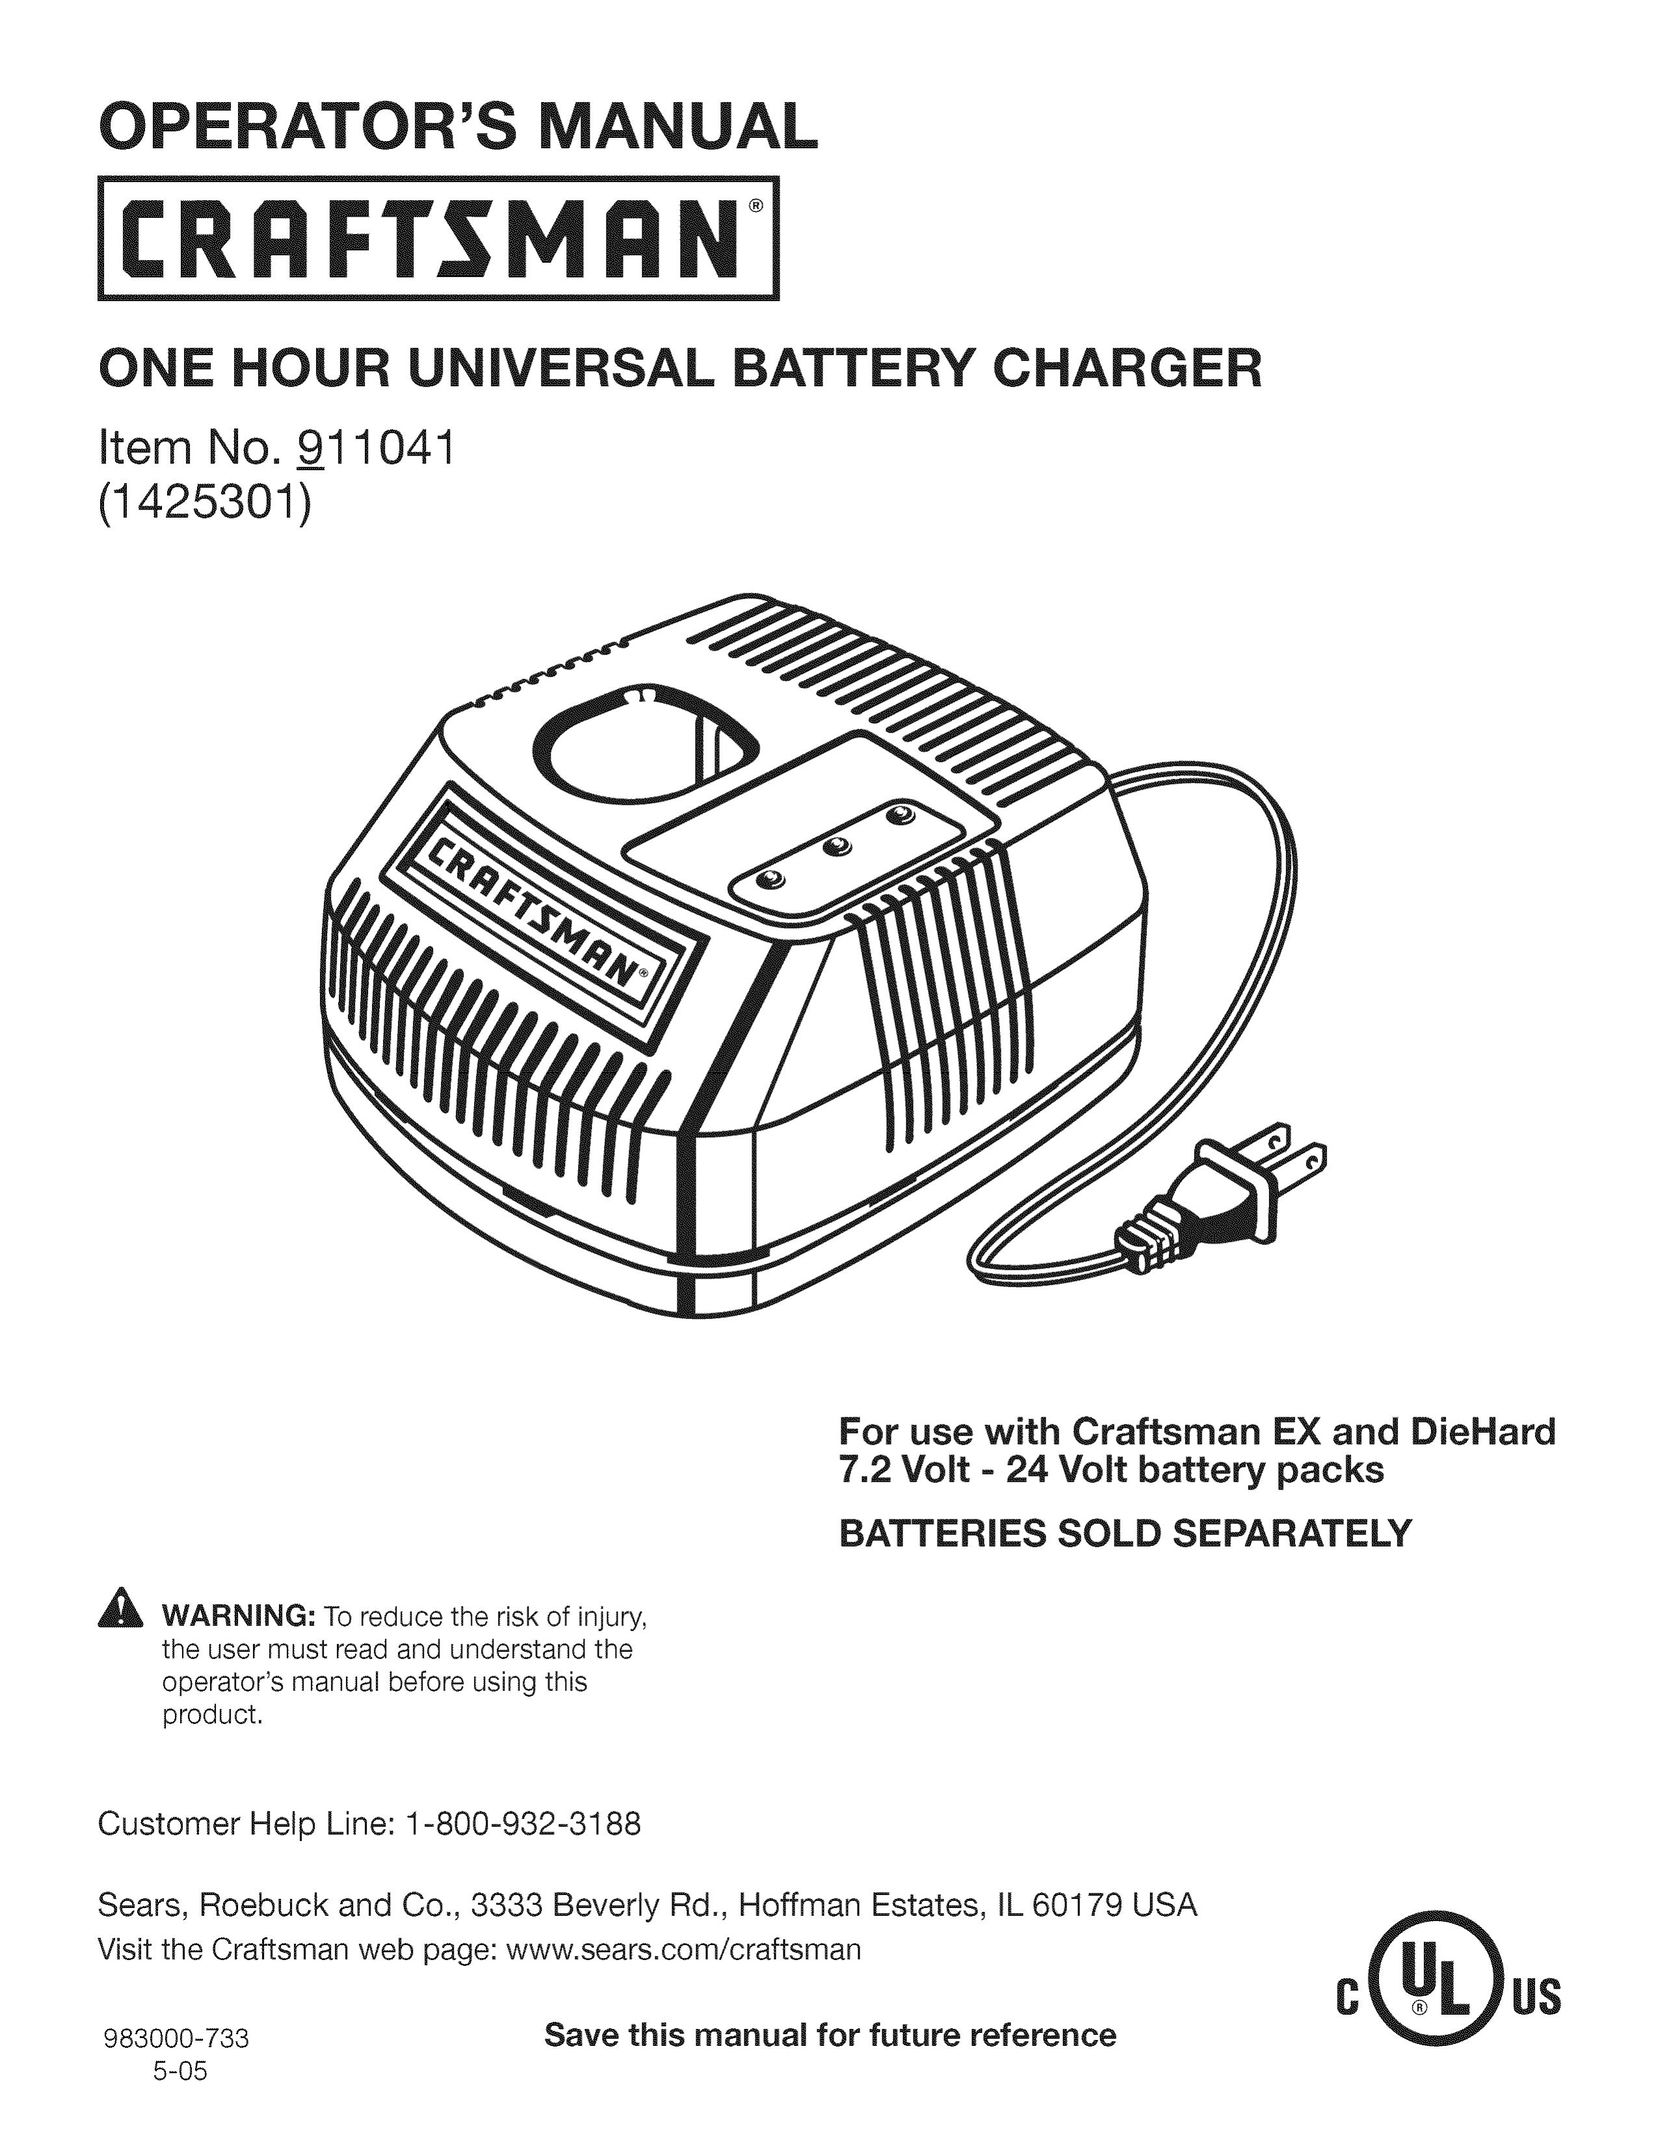 Craftsman 911 041 Battery Charger User Manual